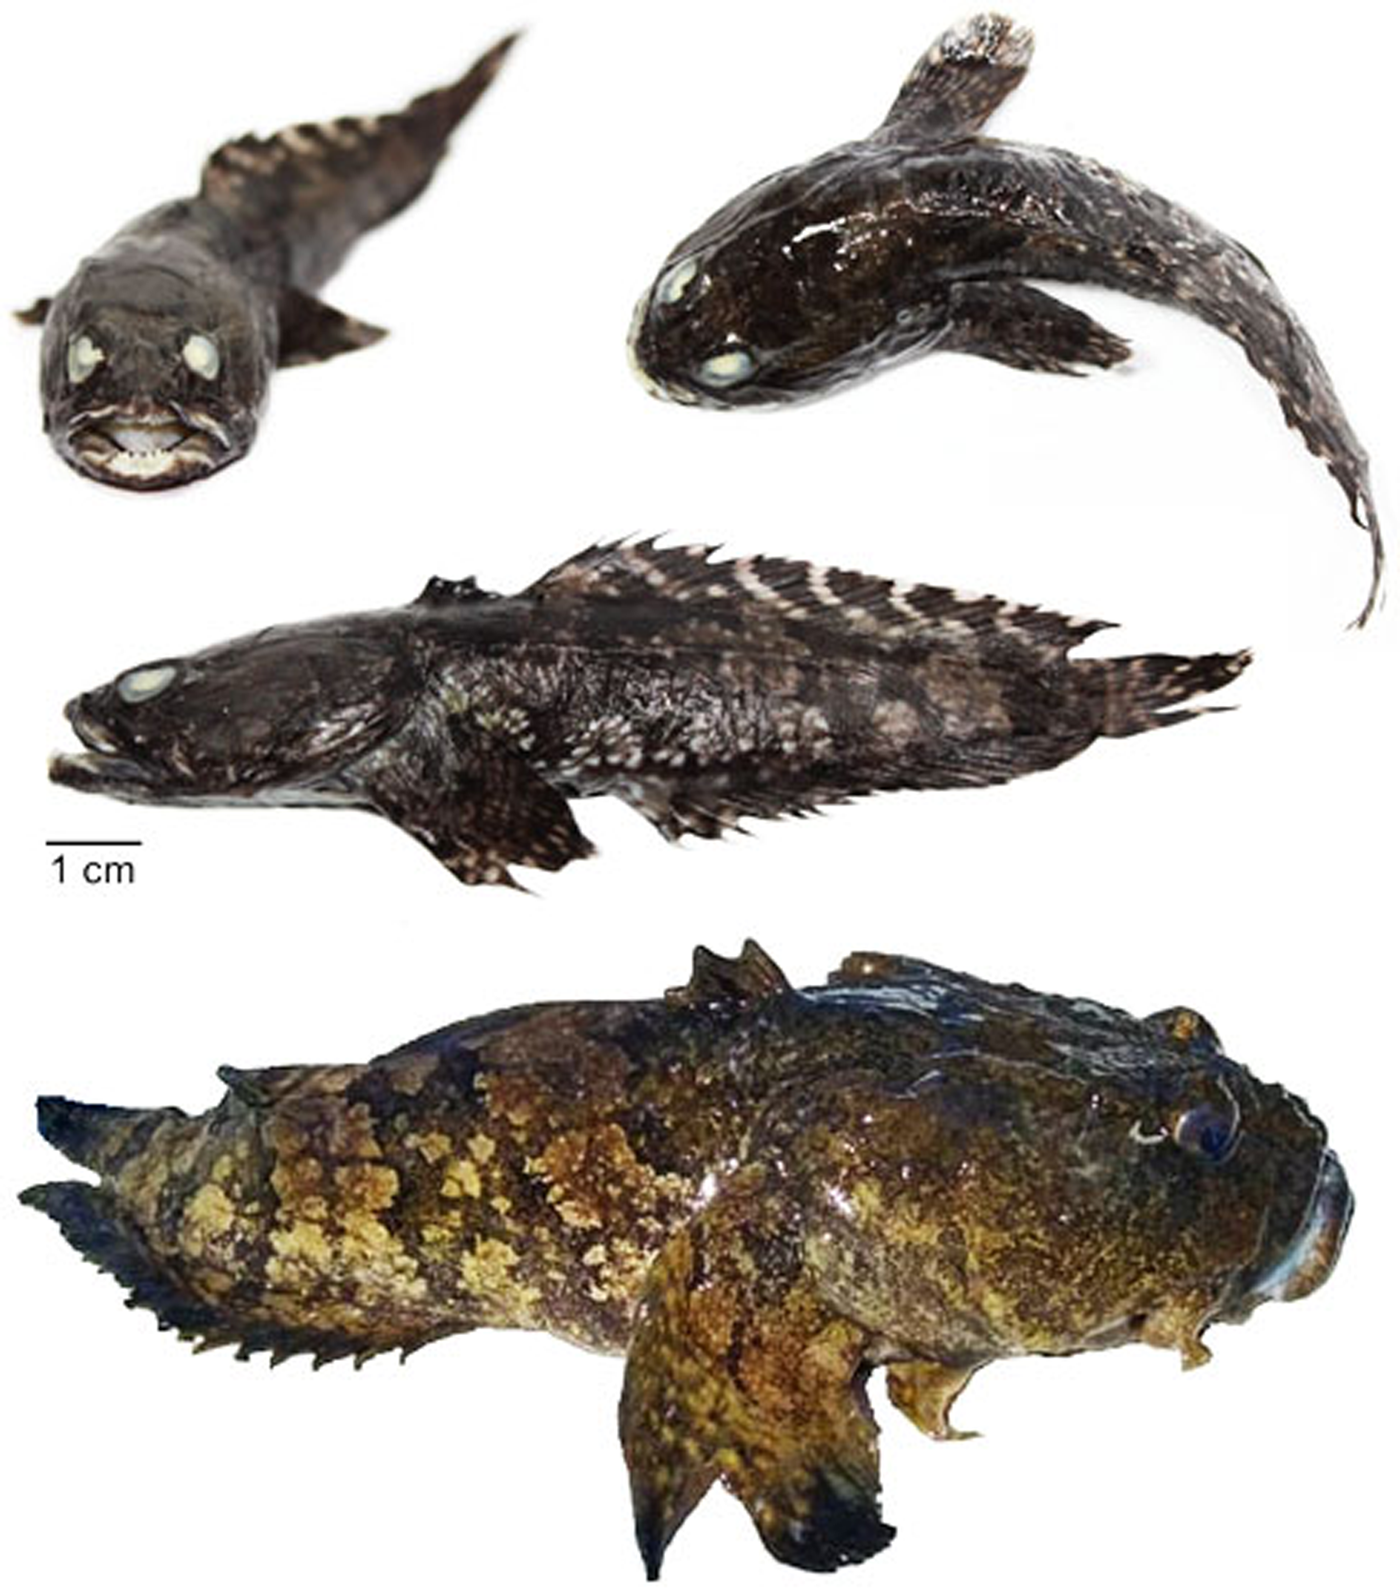 Opsanus beta (Goode & Bean, 1880) (Acanthopterygii: Batrachoididae), a  non-indigenous toadfish in Sepetiba Bay, south-eastern Brazil, Journal of  the Marine Biological Association of the United Kingdom